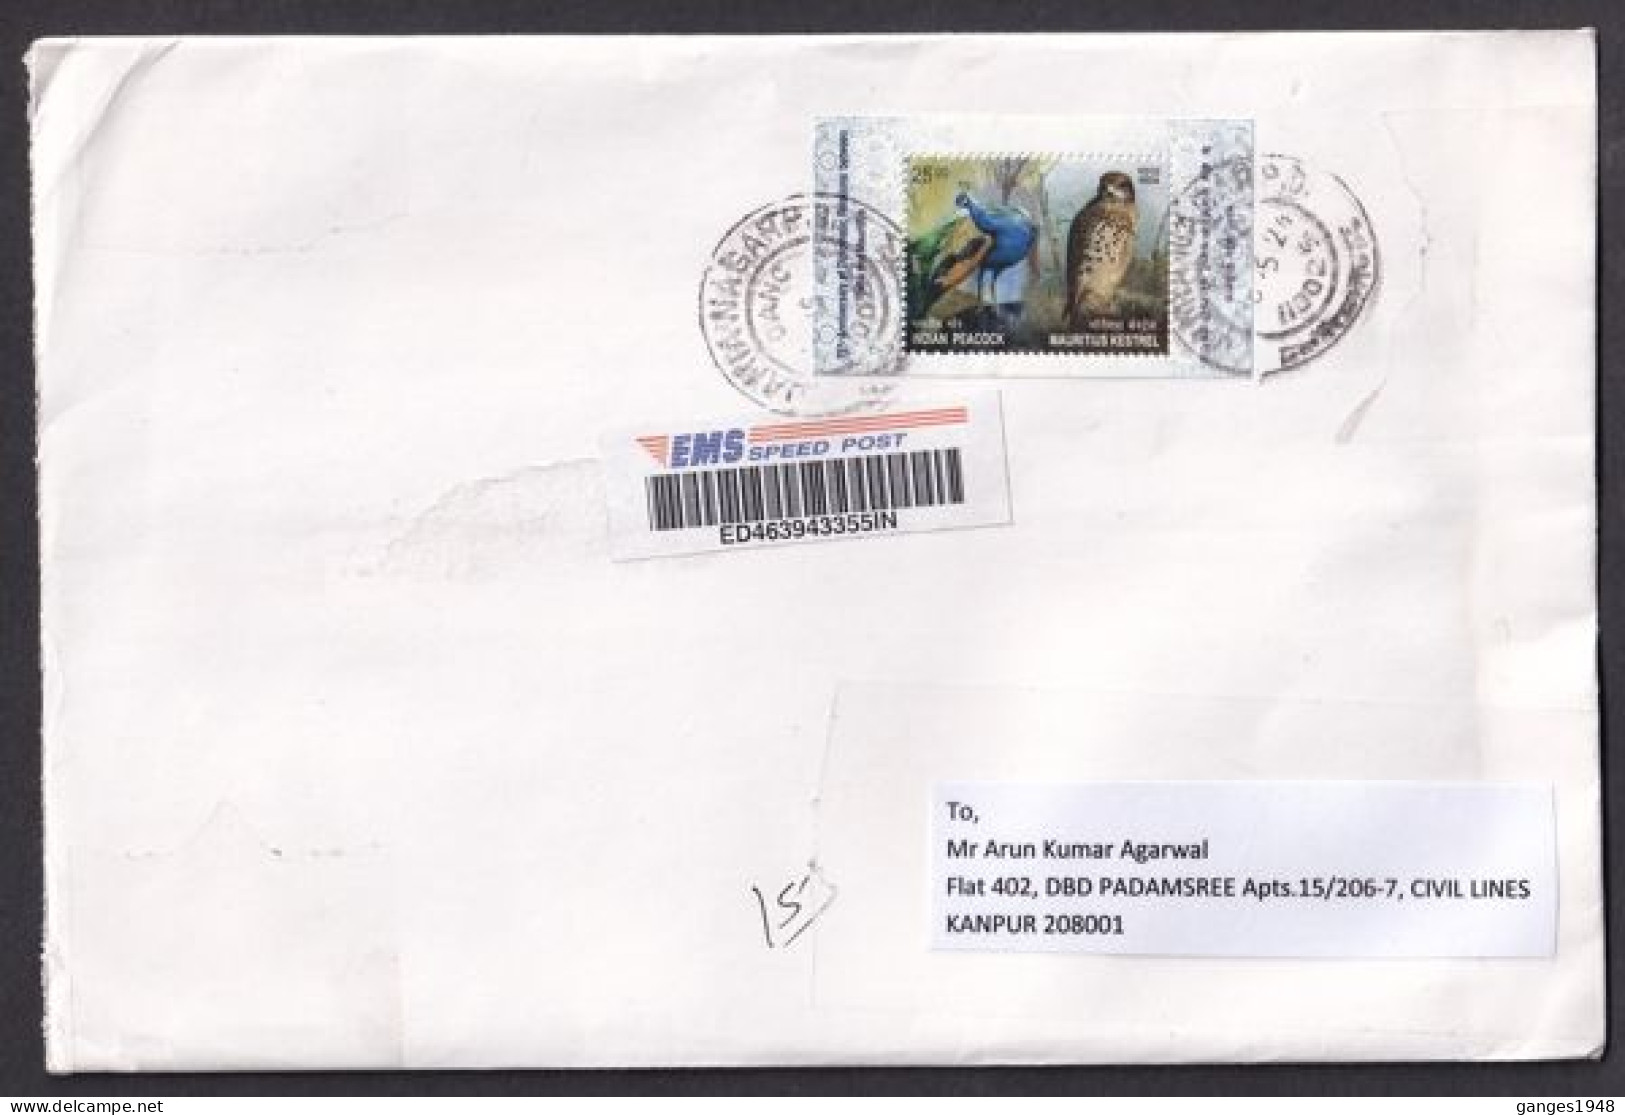 India - Mauritius Joint Issue  Peacock And Kestrel Bird Of Prey  2v MS On Mailed Cover  #  36603  D  Inde Indien - Pfauen